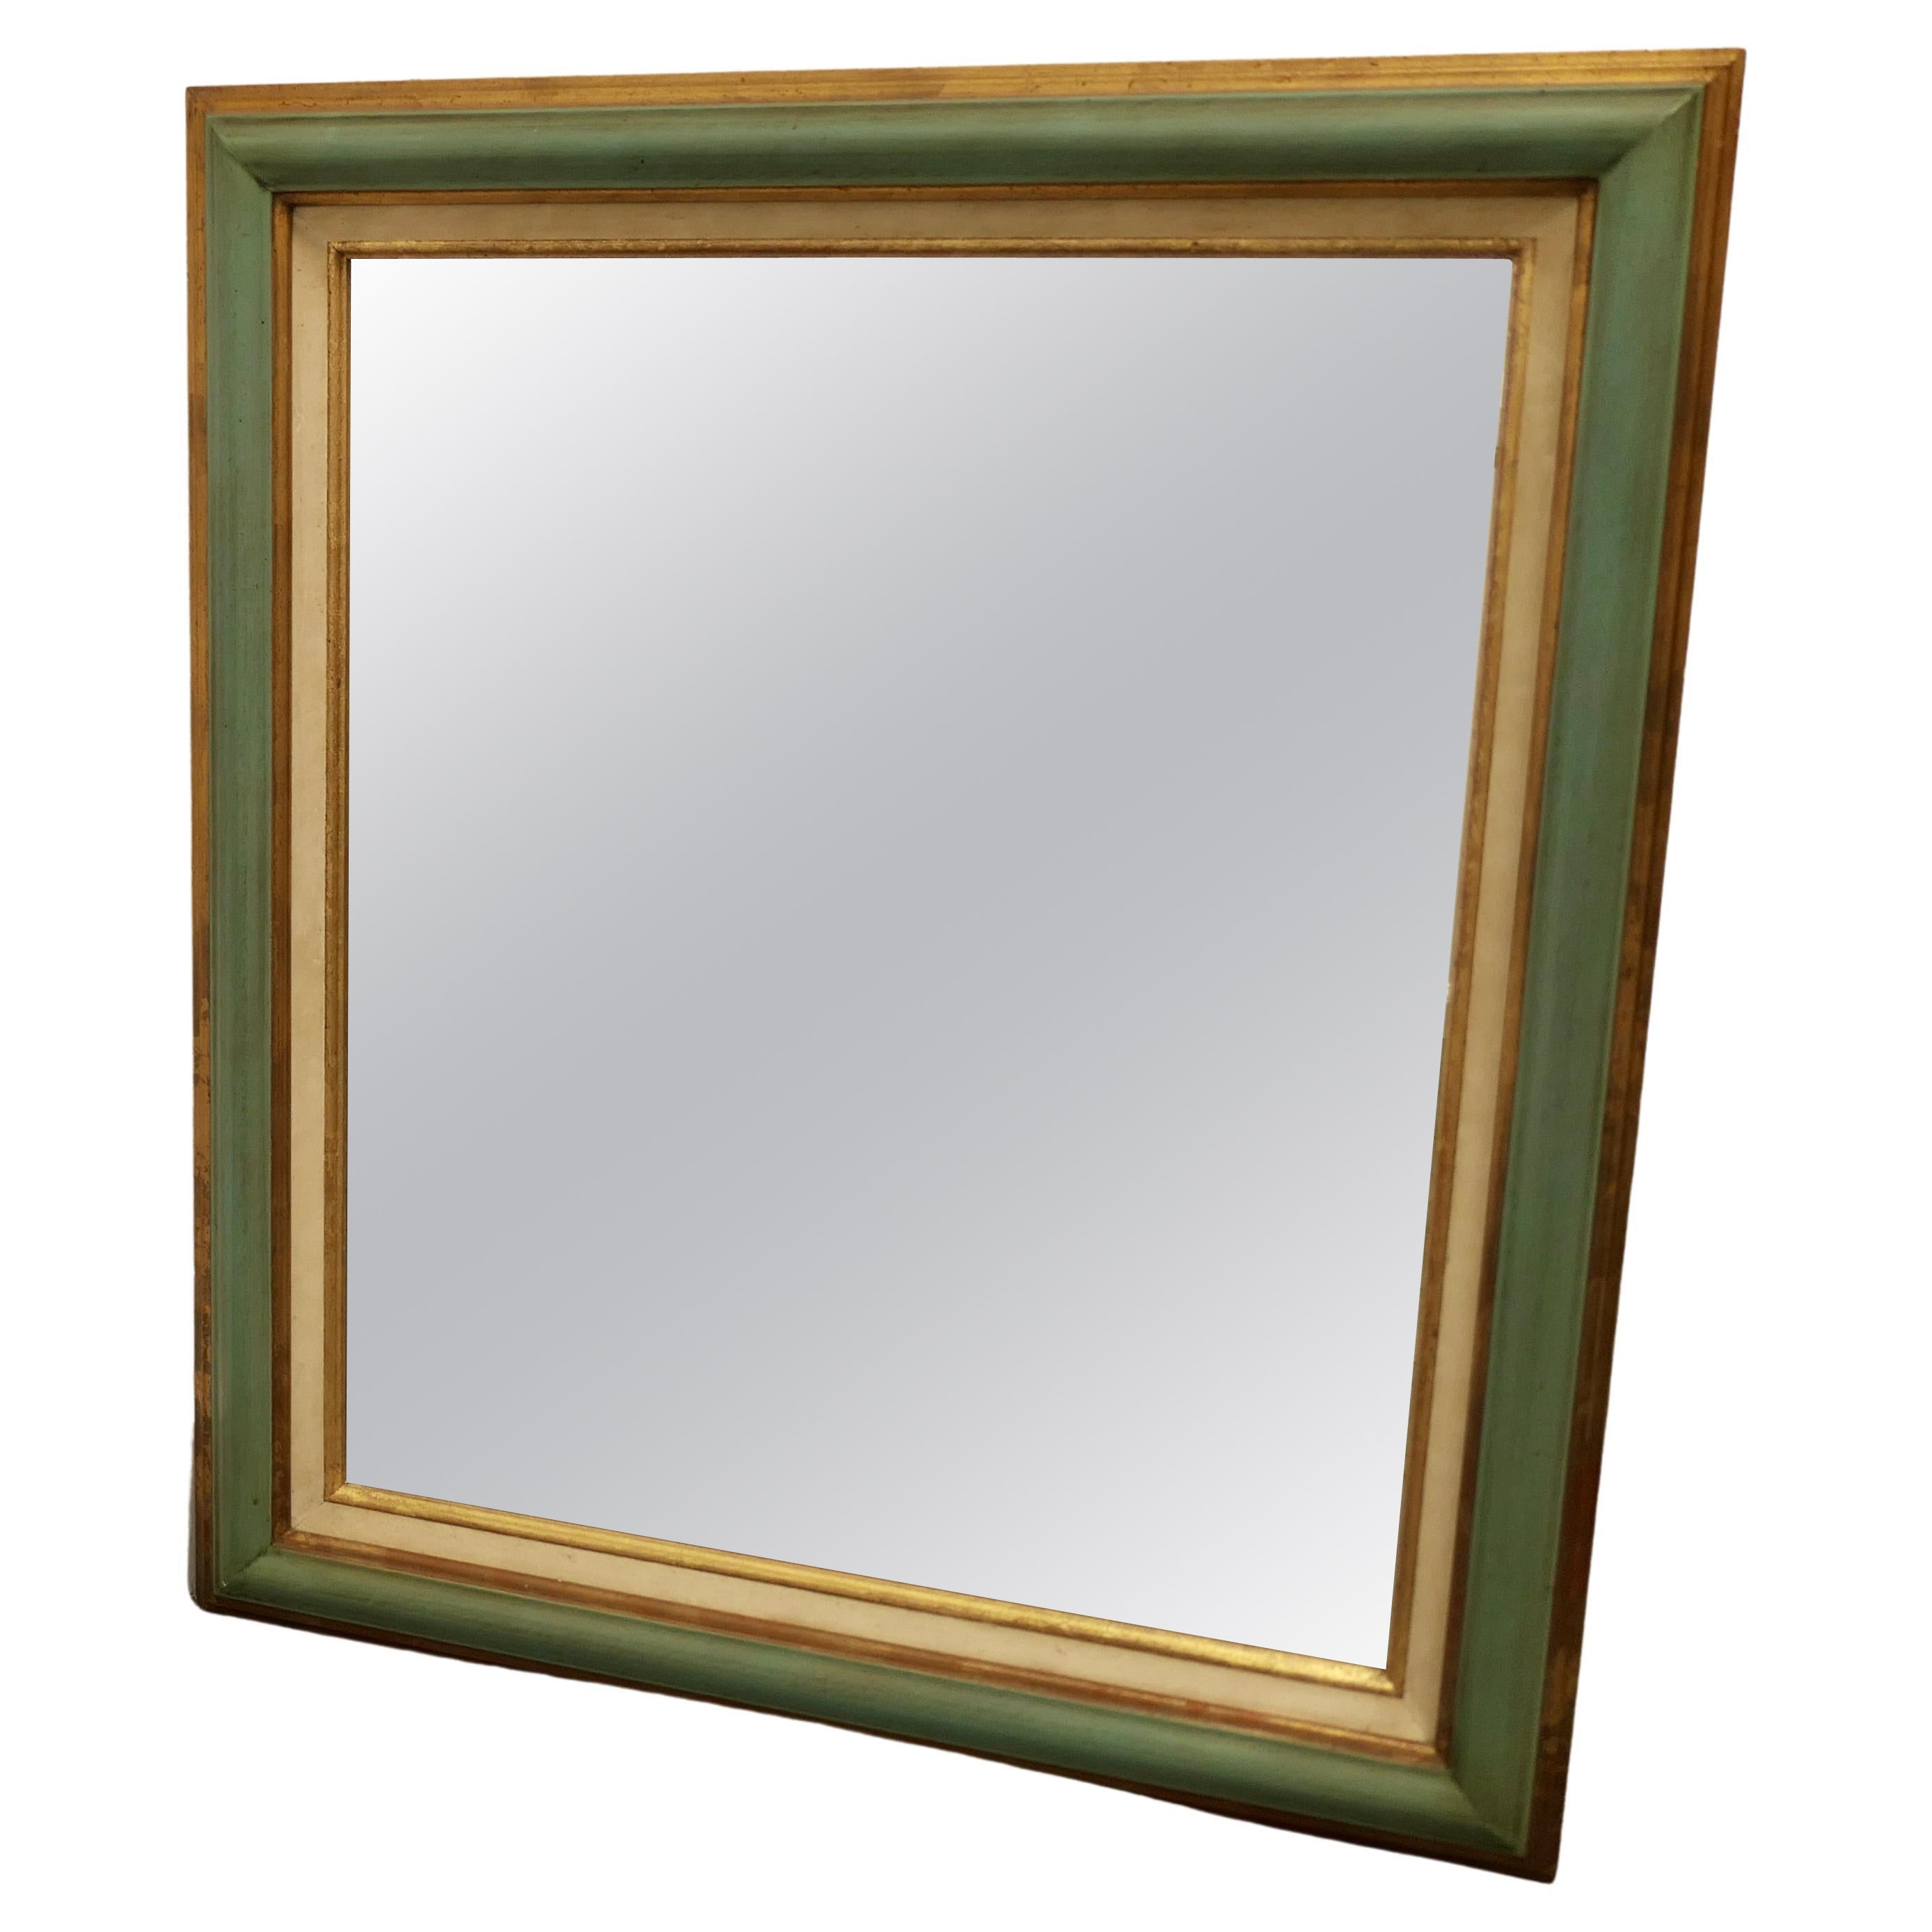 Elegant French Painted Frame Wall Mirror